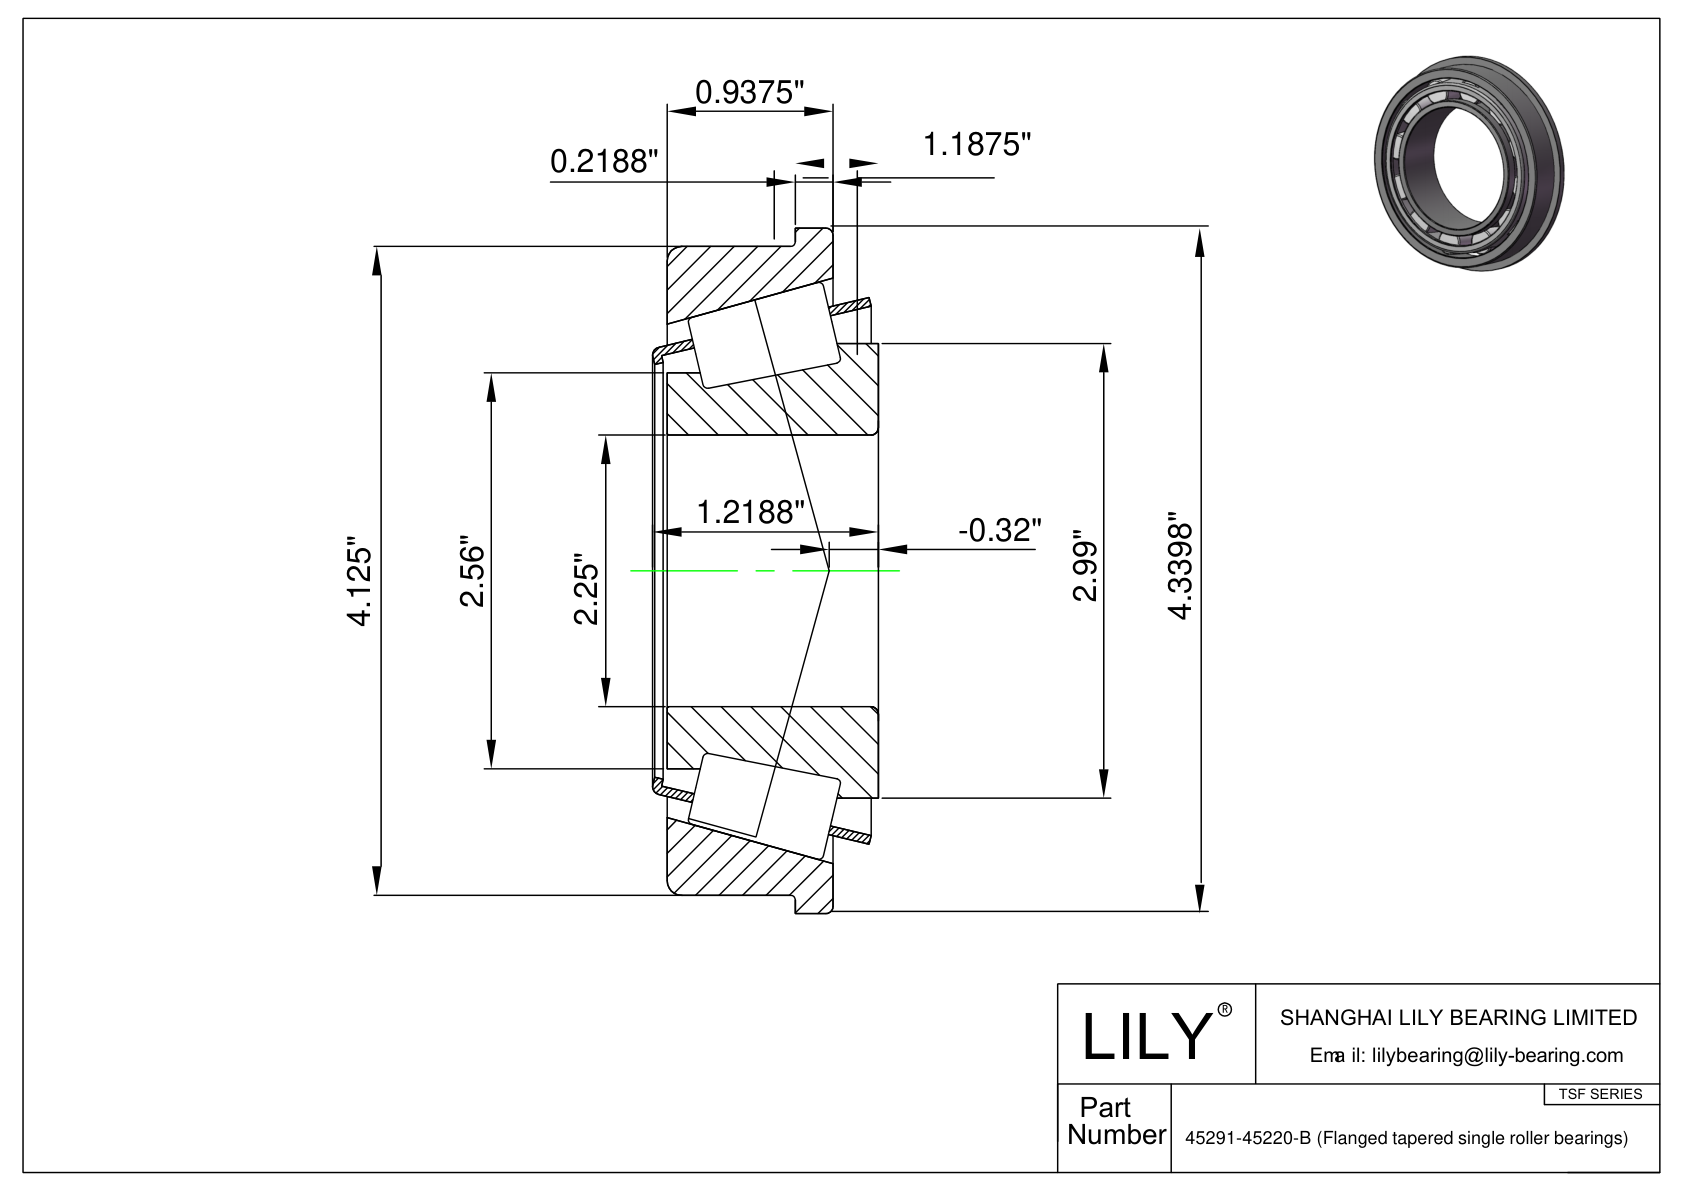 45290-45220-B TSF (Tapered Single Roller Bearings with Flange) (Imperial) cad drawing